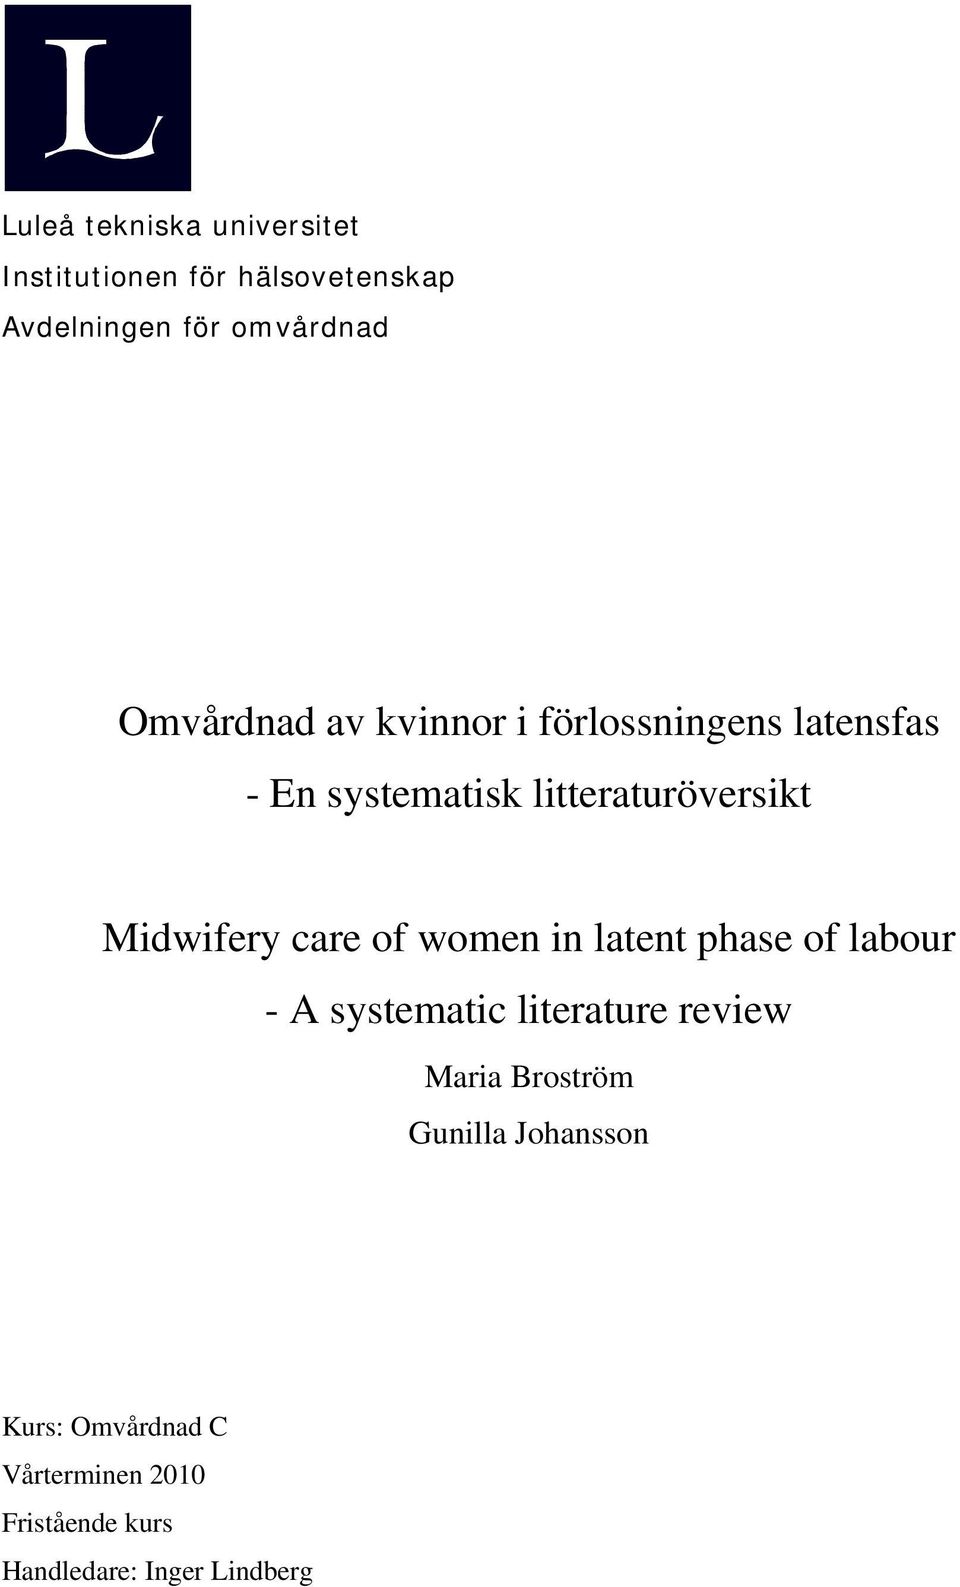 Midwifery care of women in latent phase of labour - A systematic literature review Maria